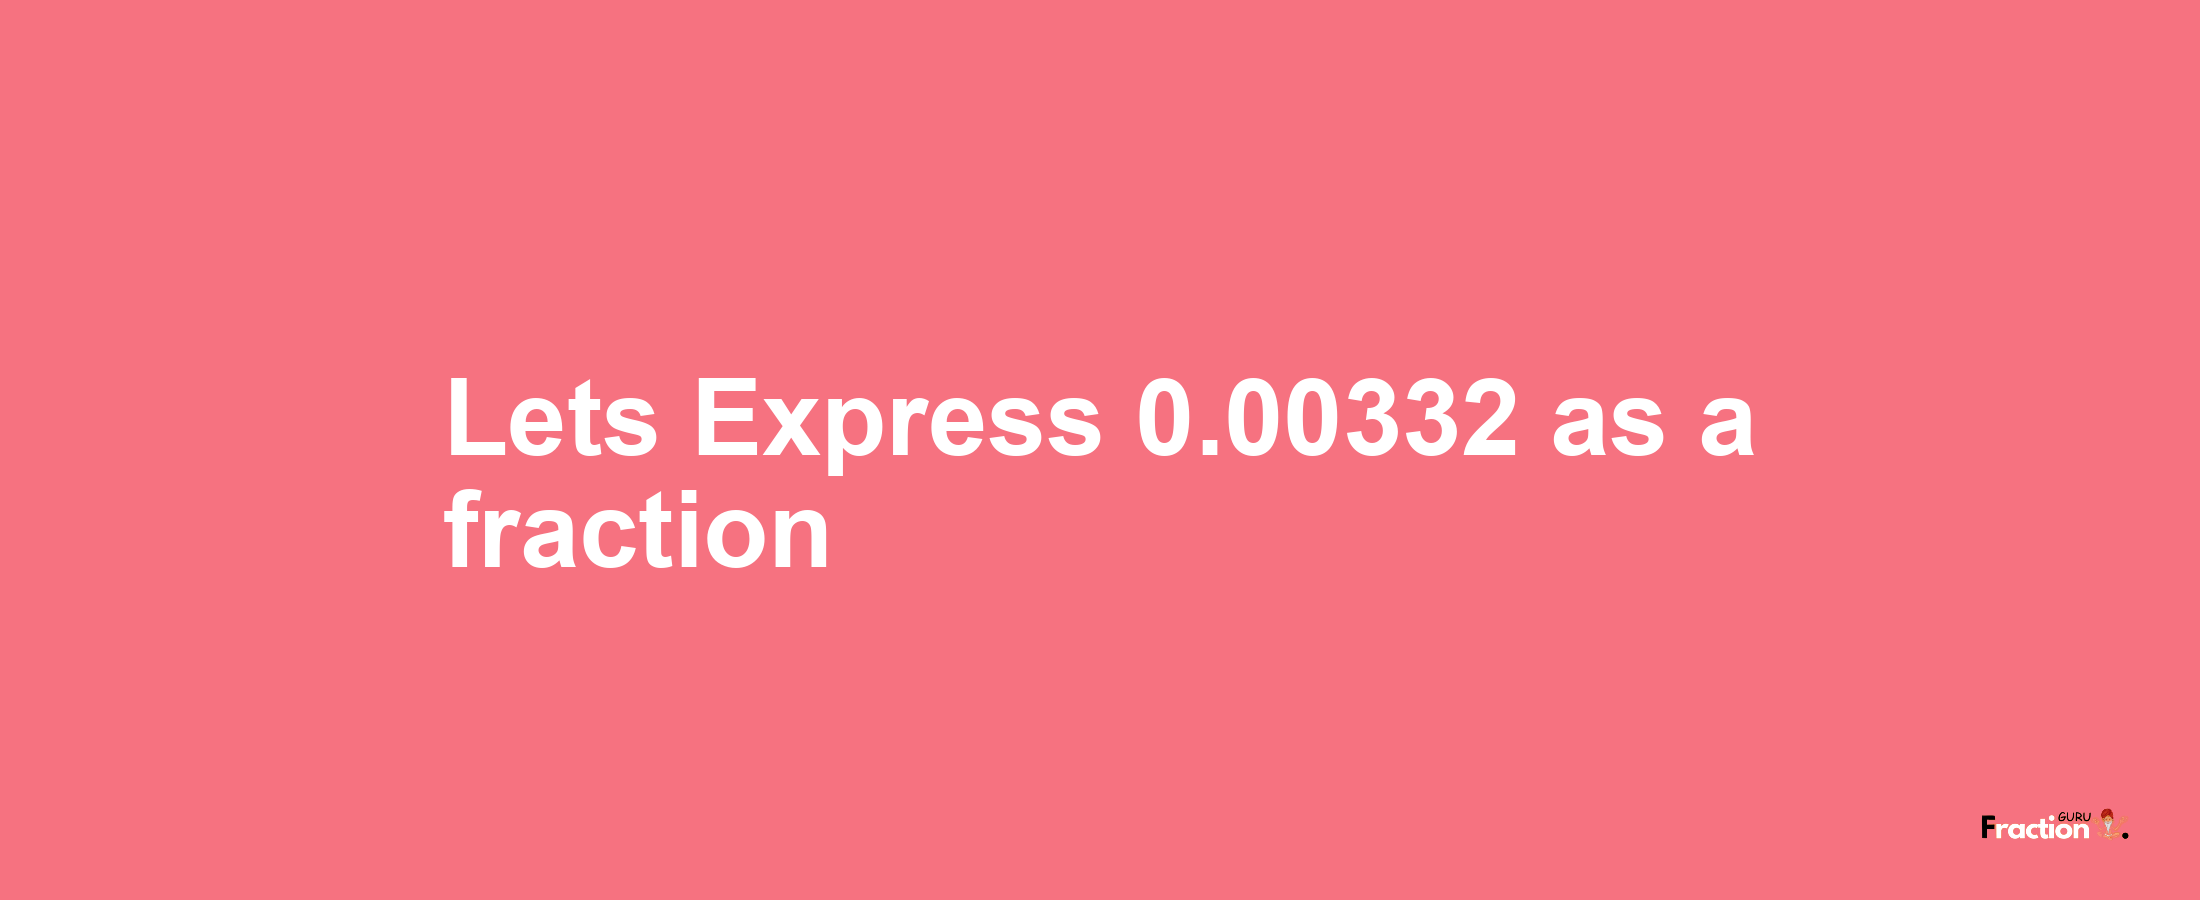 Lets Express 0.00332 as afraction